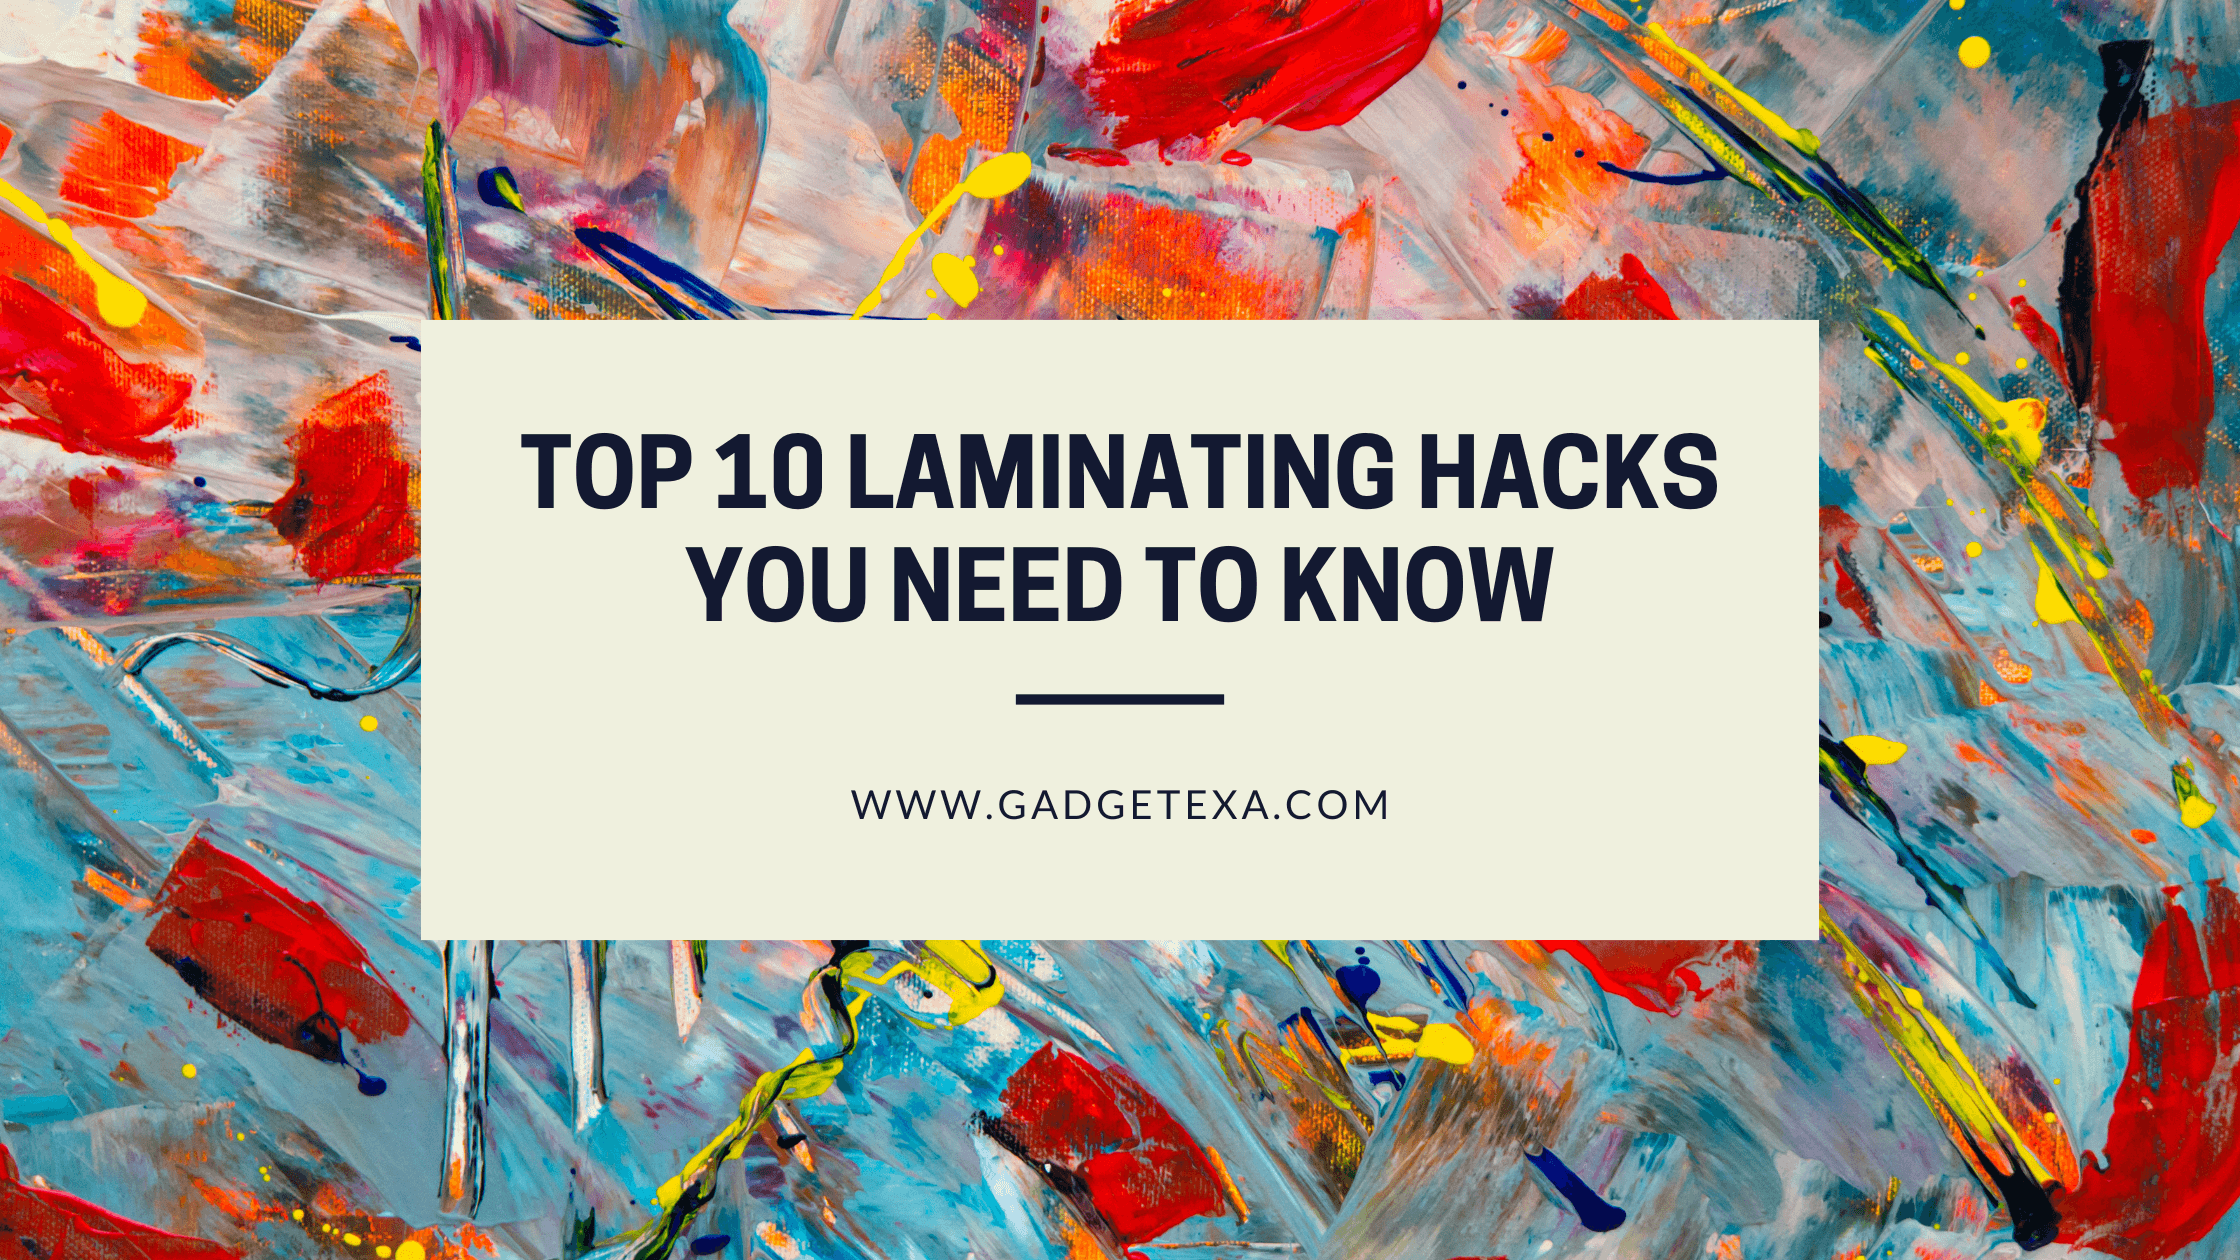 You are currently viewing Top 10 Laminating Hacks You Need to Know